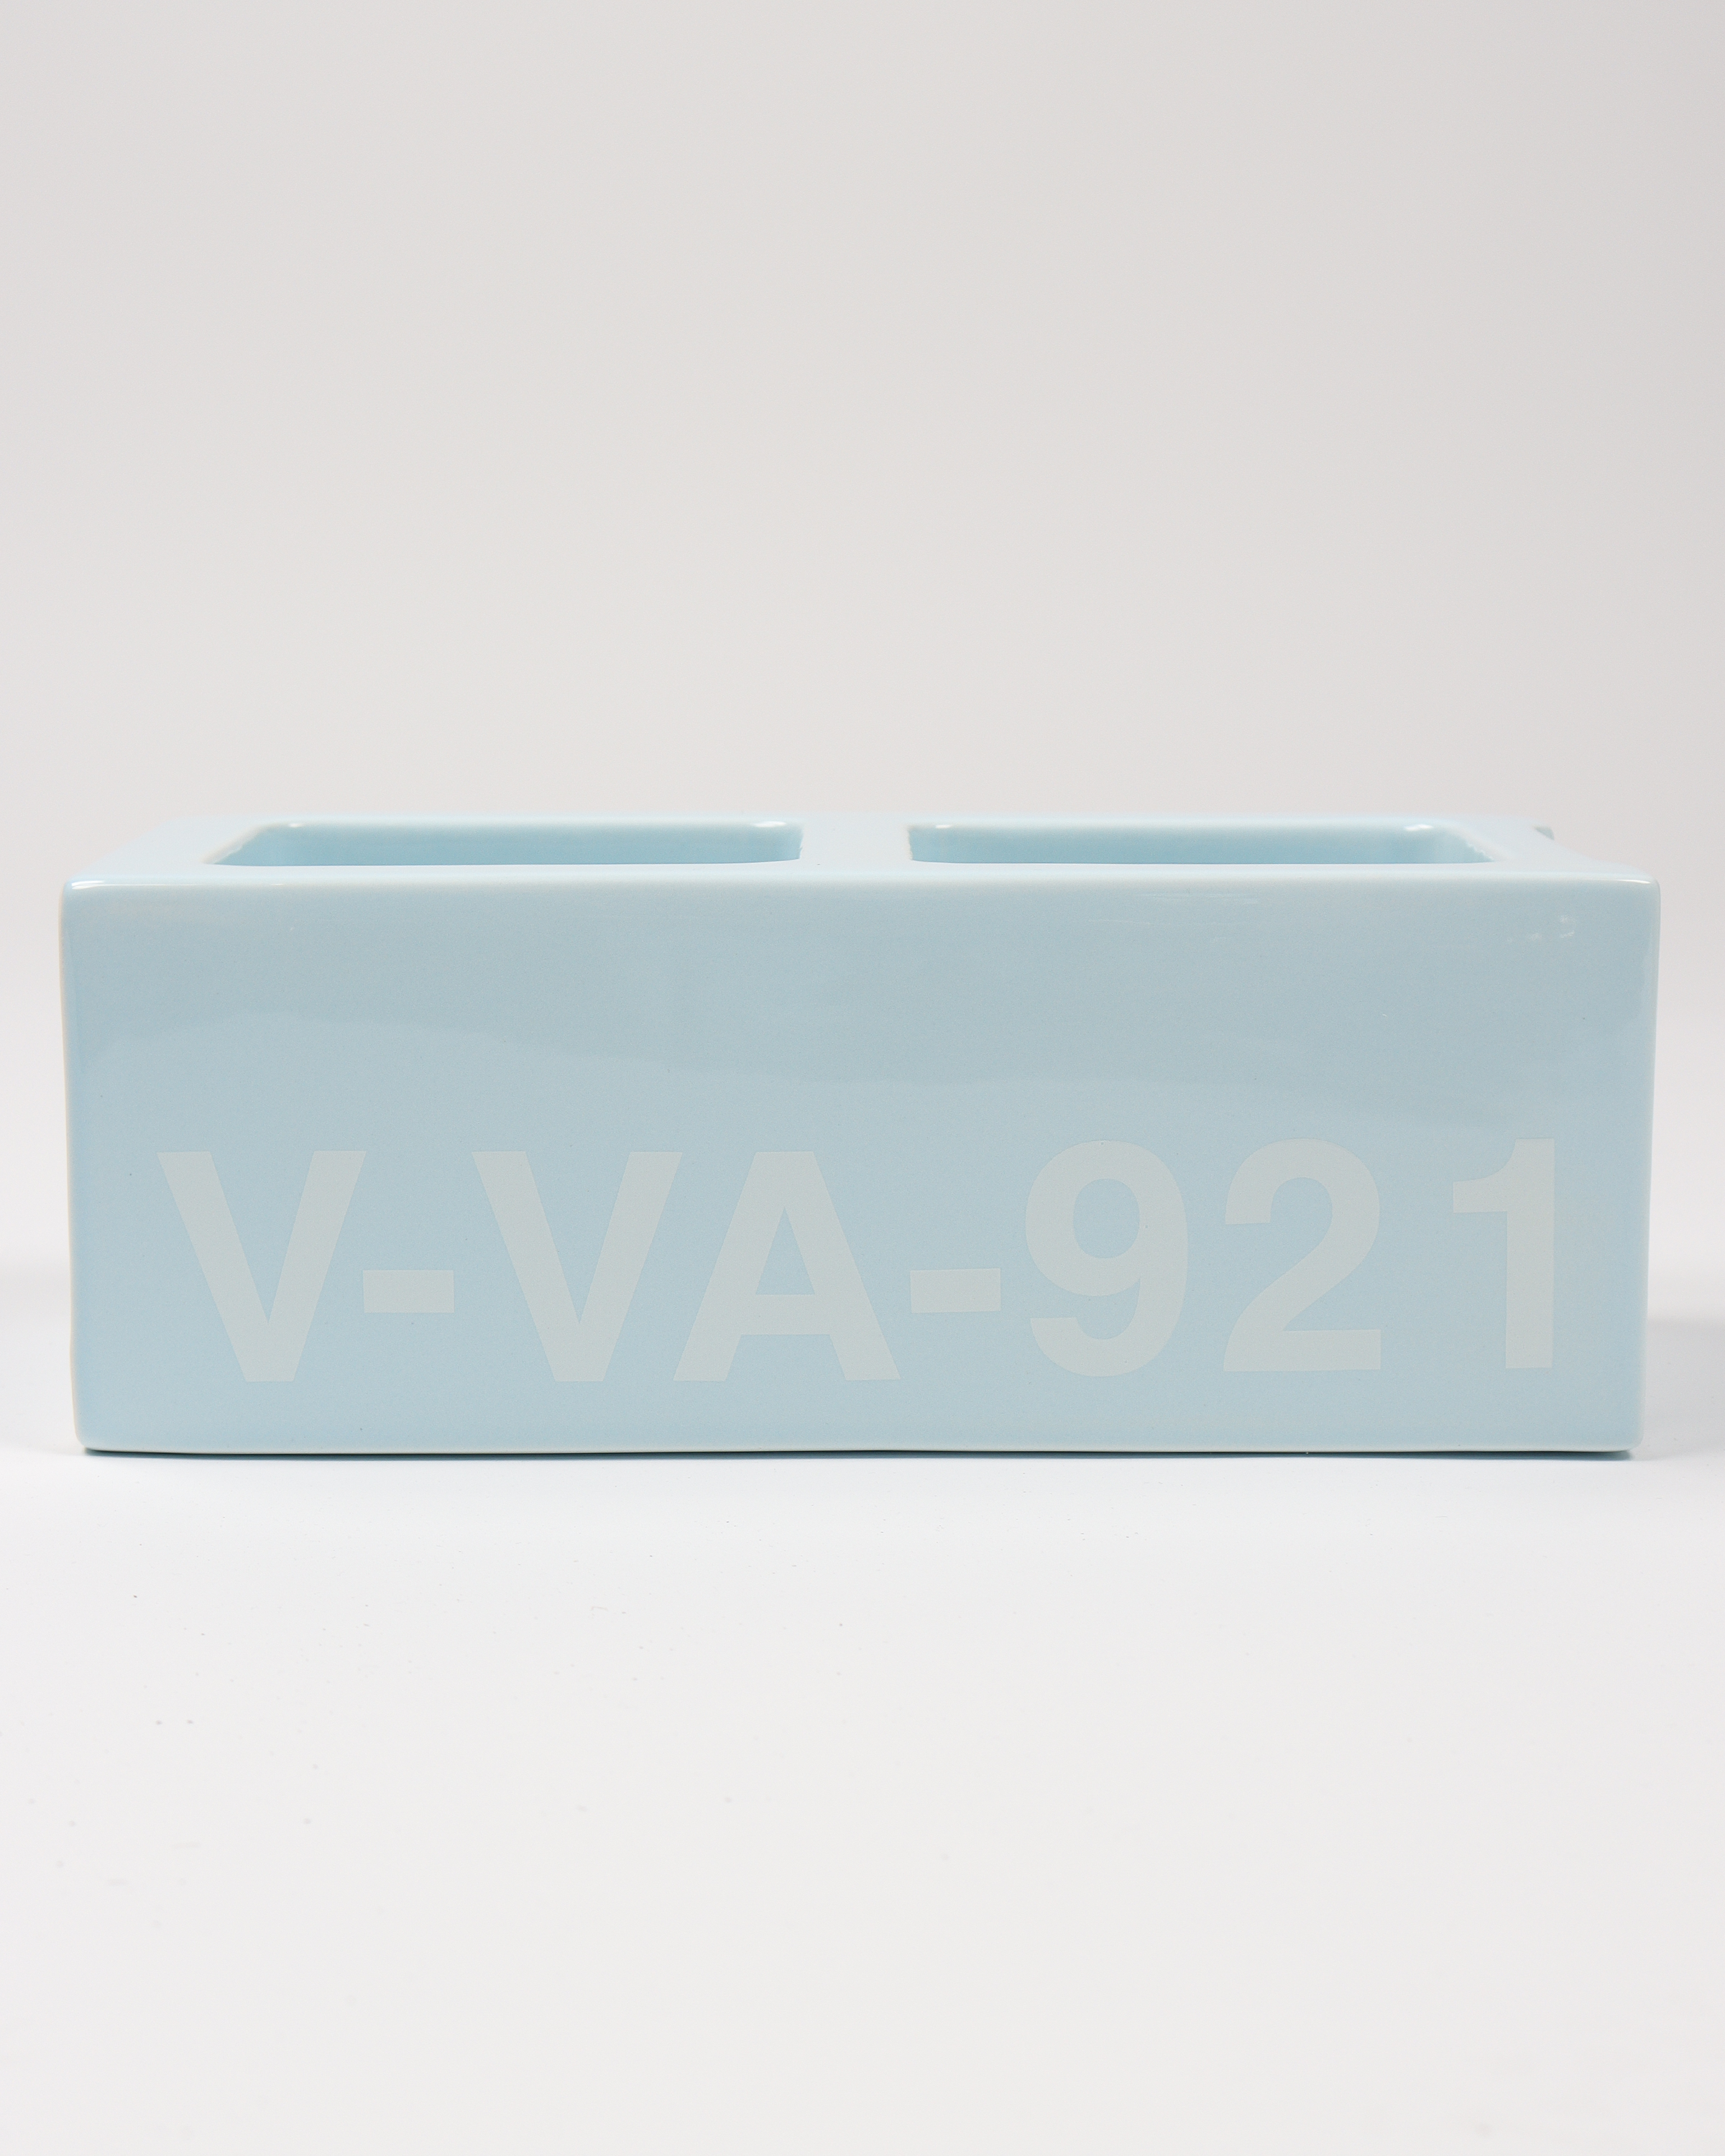 Virgil Abloh & Vitra Launch Bold Furniture Collection Jean Prouve